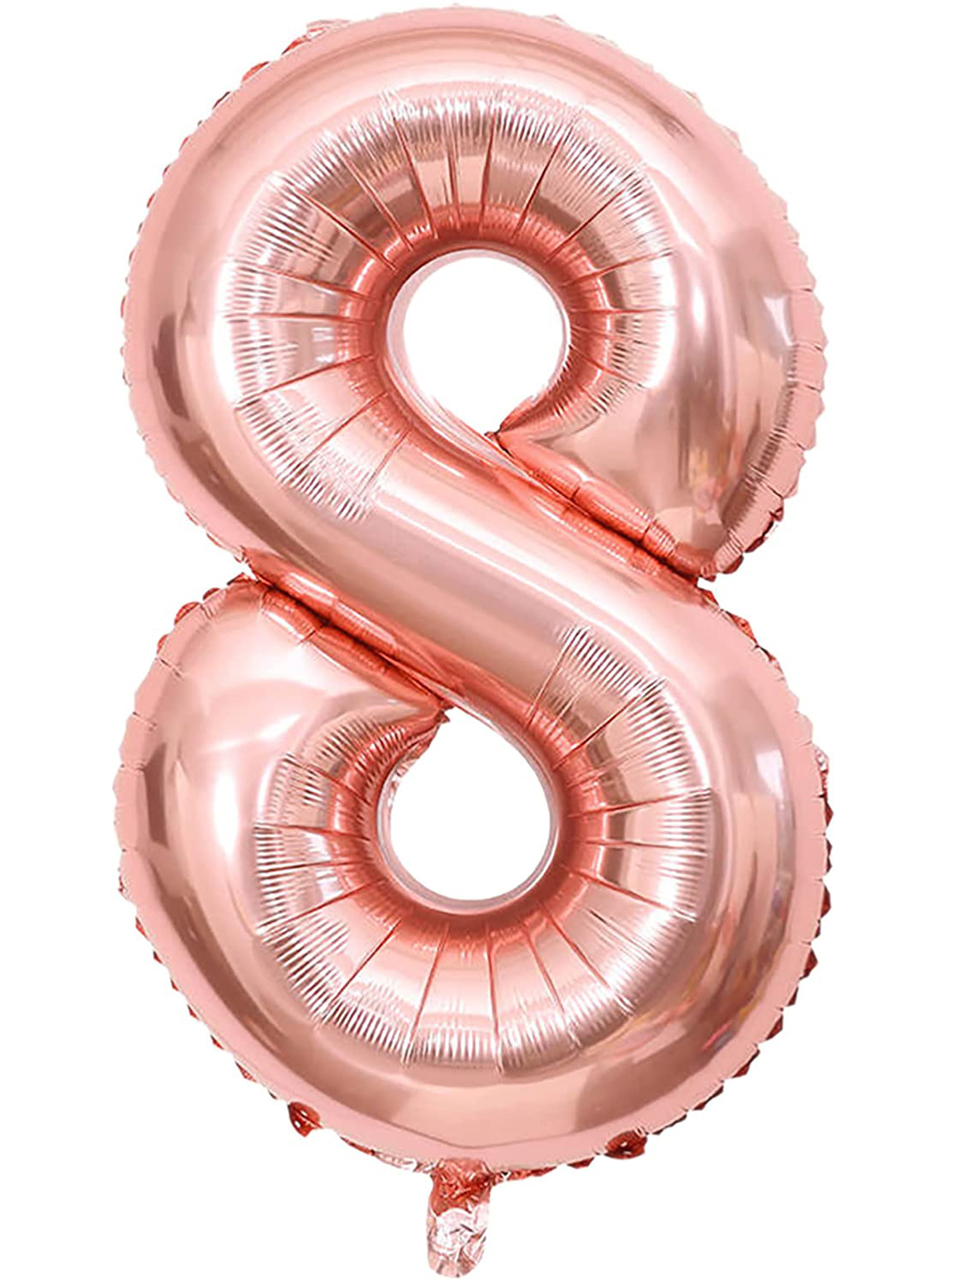 Picture of 40'' Foil Balloon Shape Number 8 - Rose Gold (1pc)